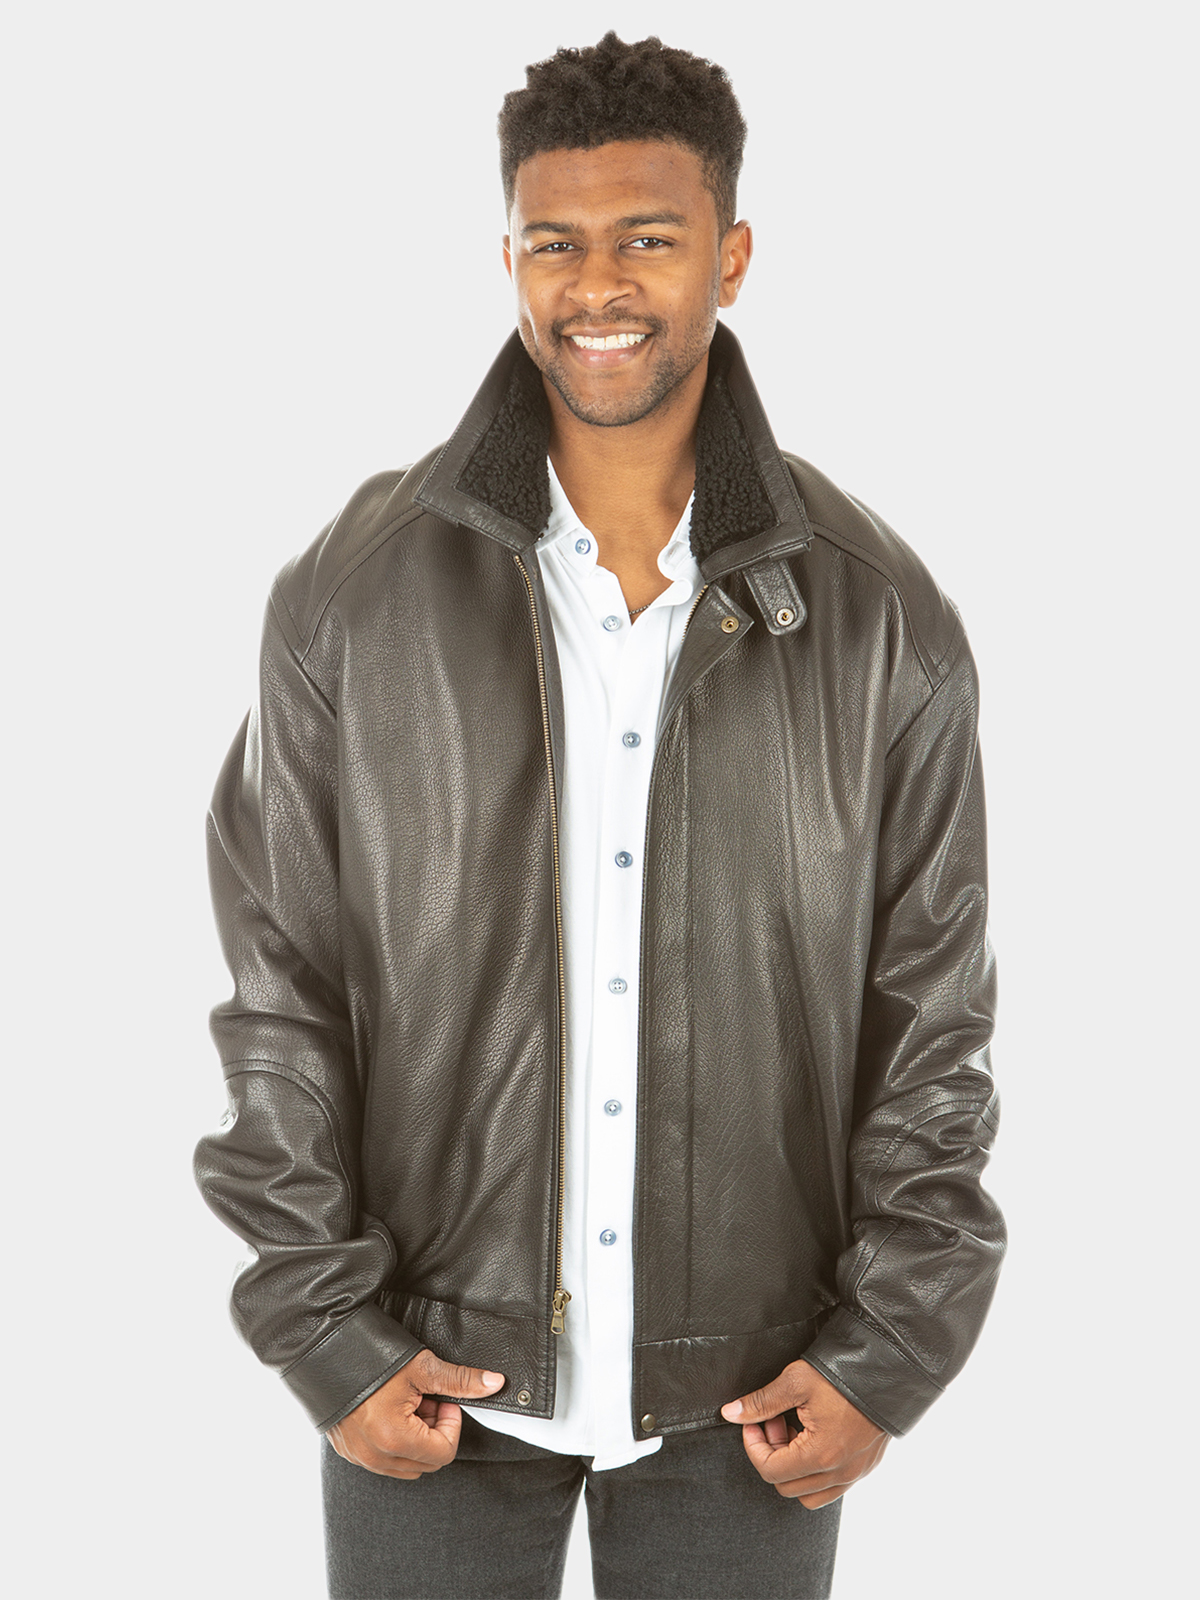 Man's Black Leather Zipper Jacket with Detachable Shearling Lamb Collar